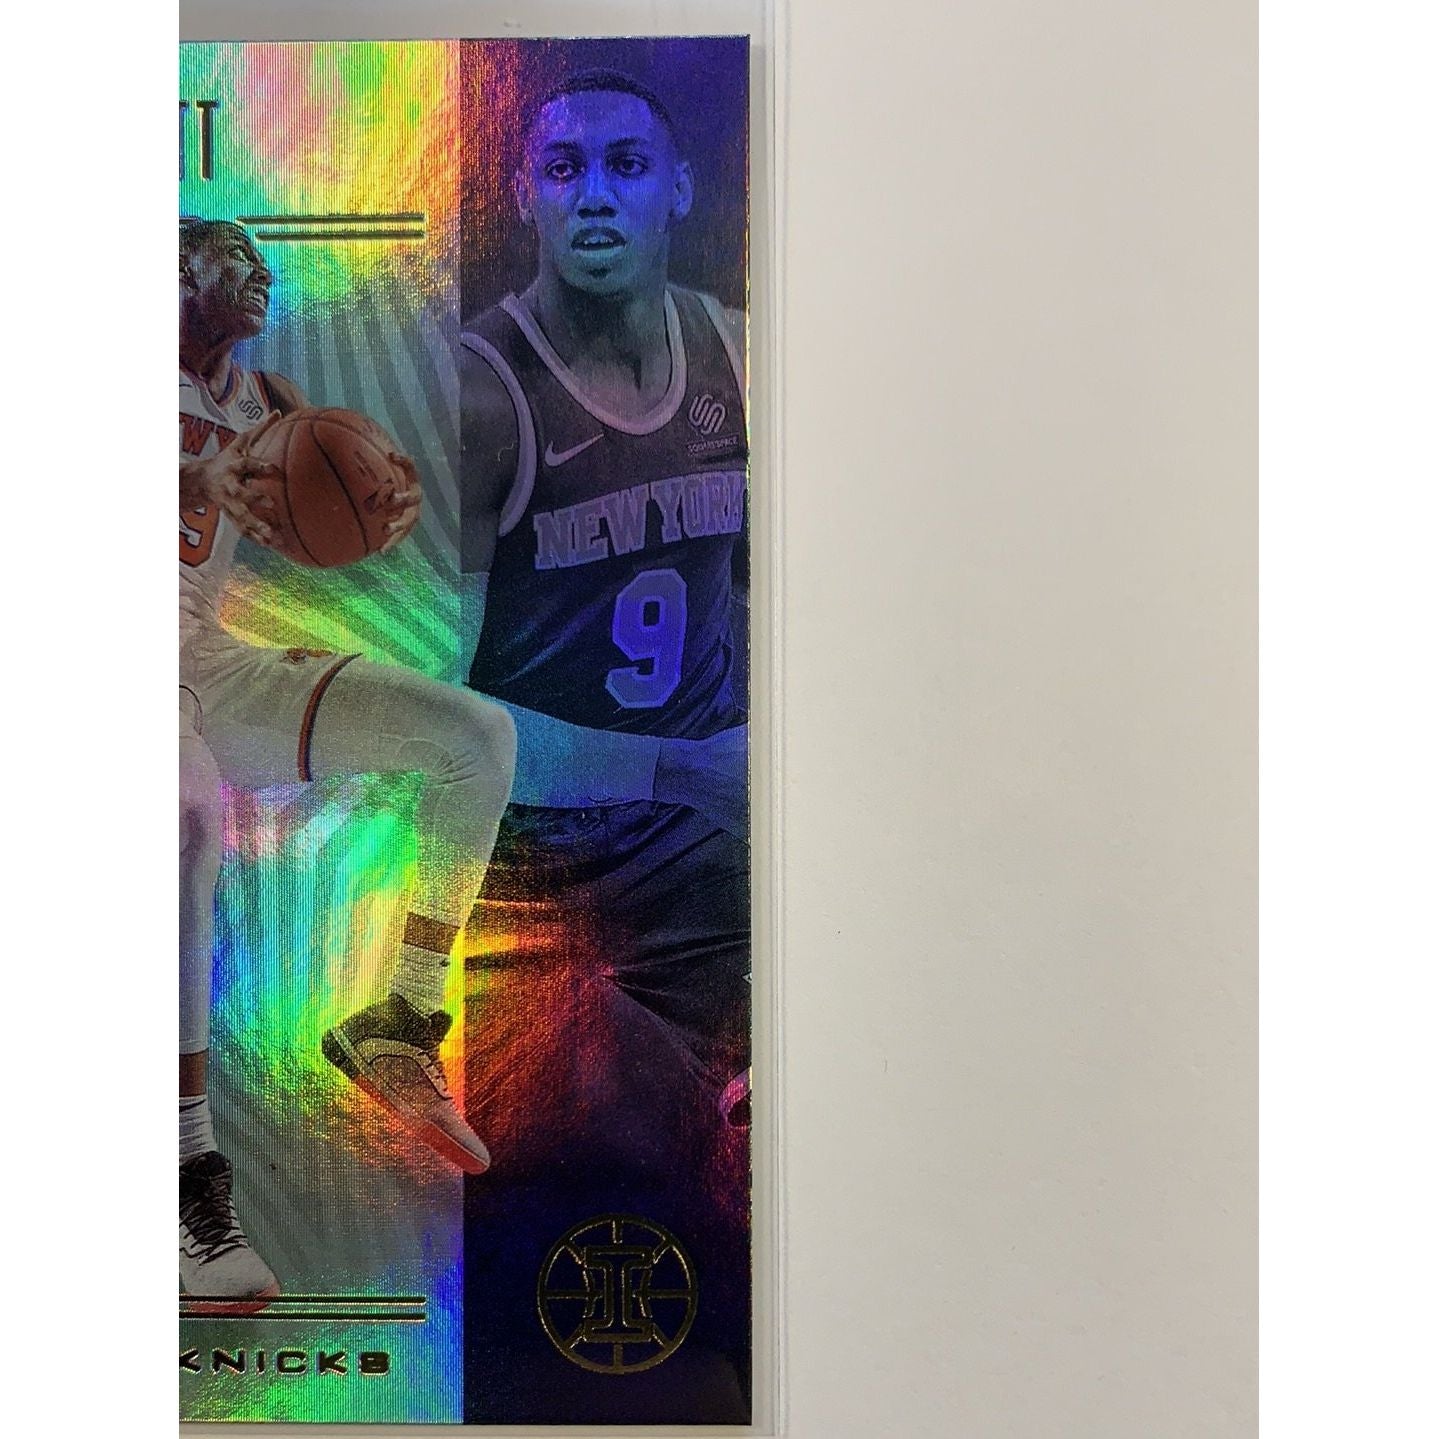  2019-20 Illusions RJ Barrett Rookie Card  Local Legends Cards & Collectibles